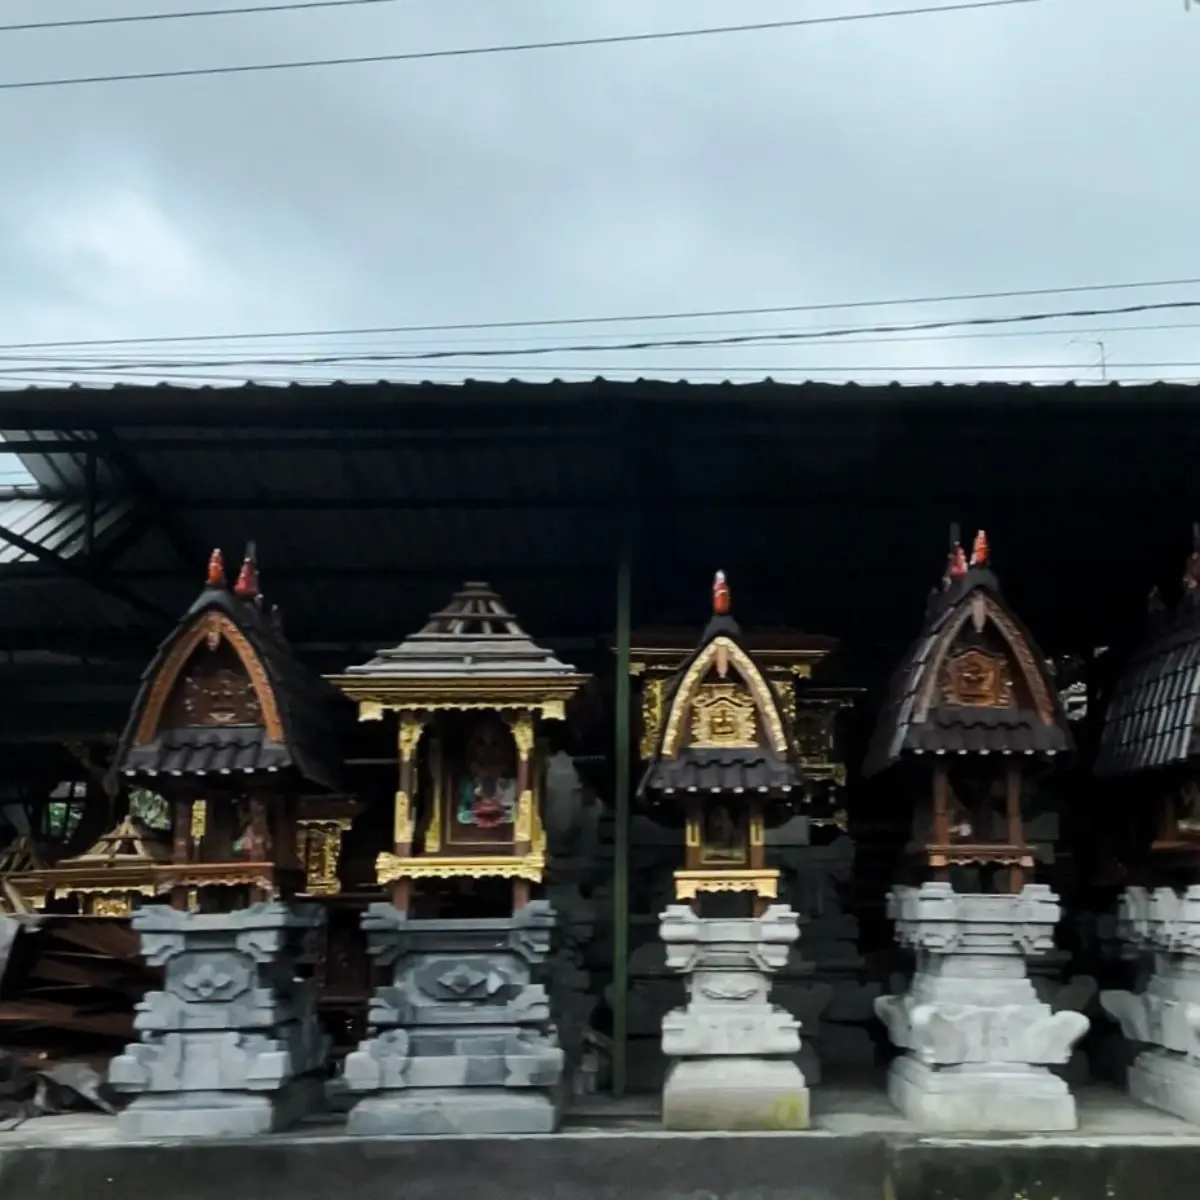 Balinese structure on the roadside